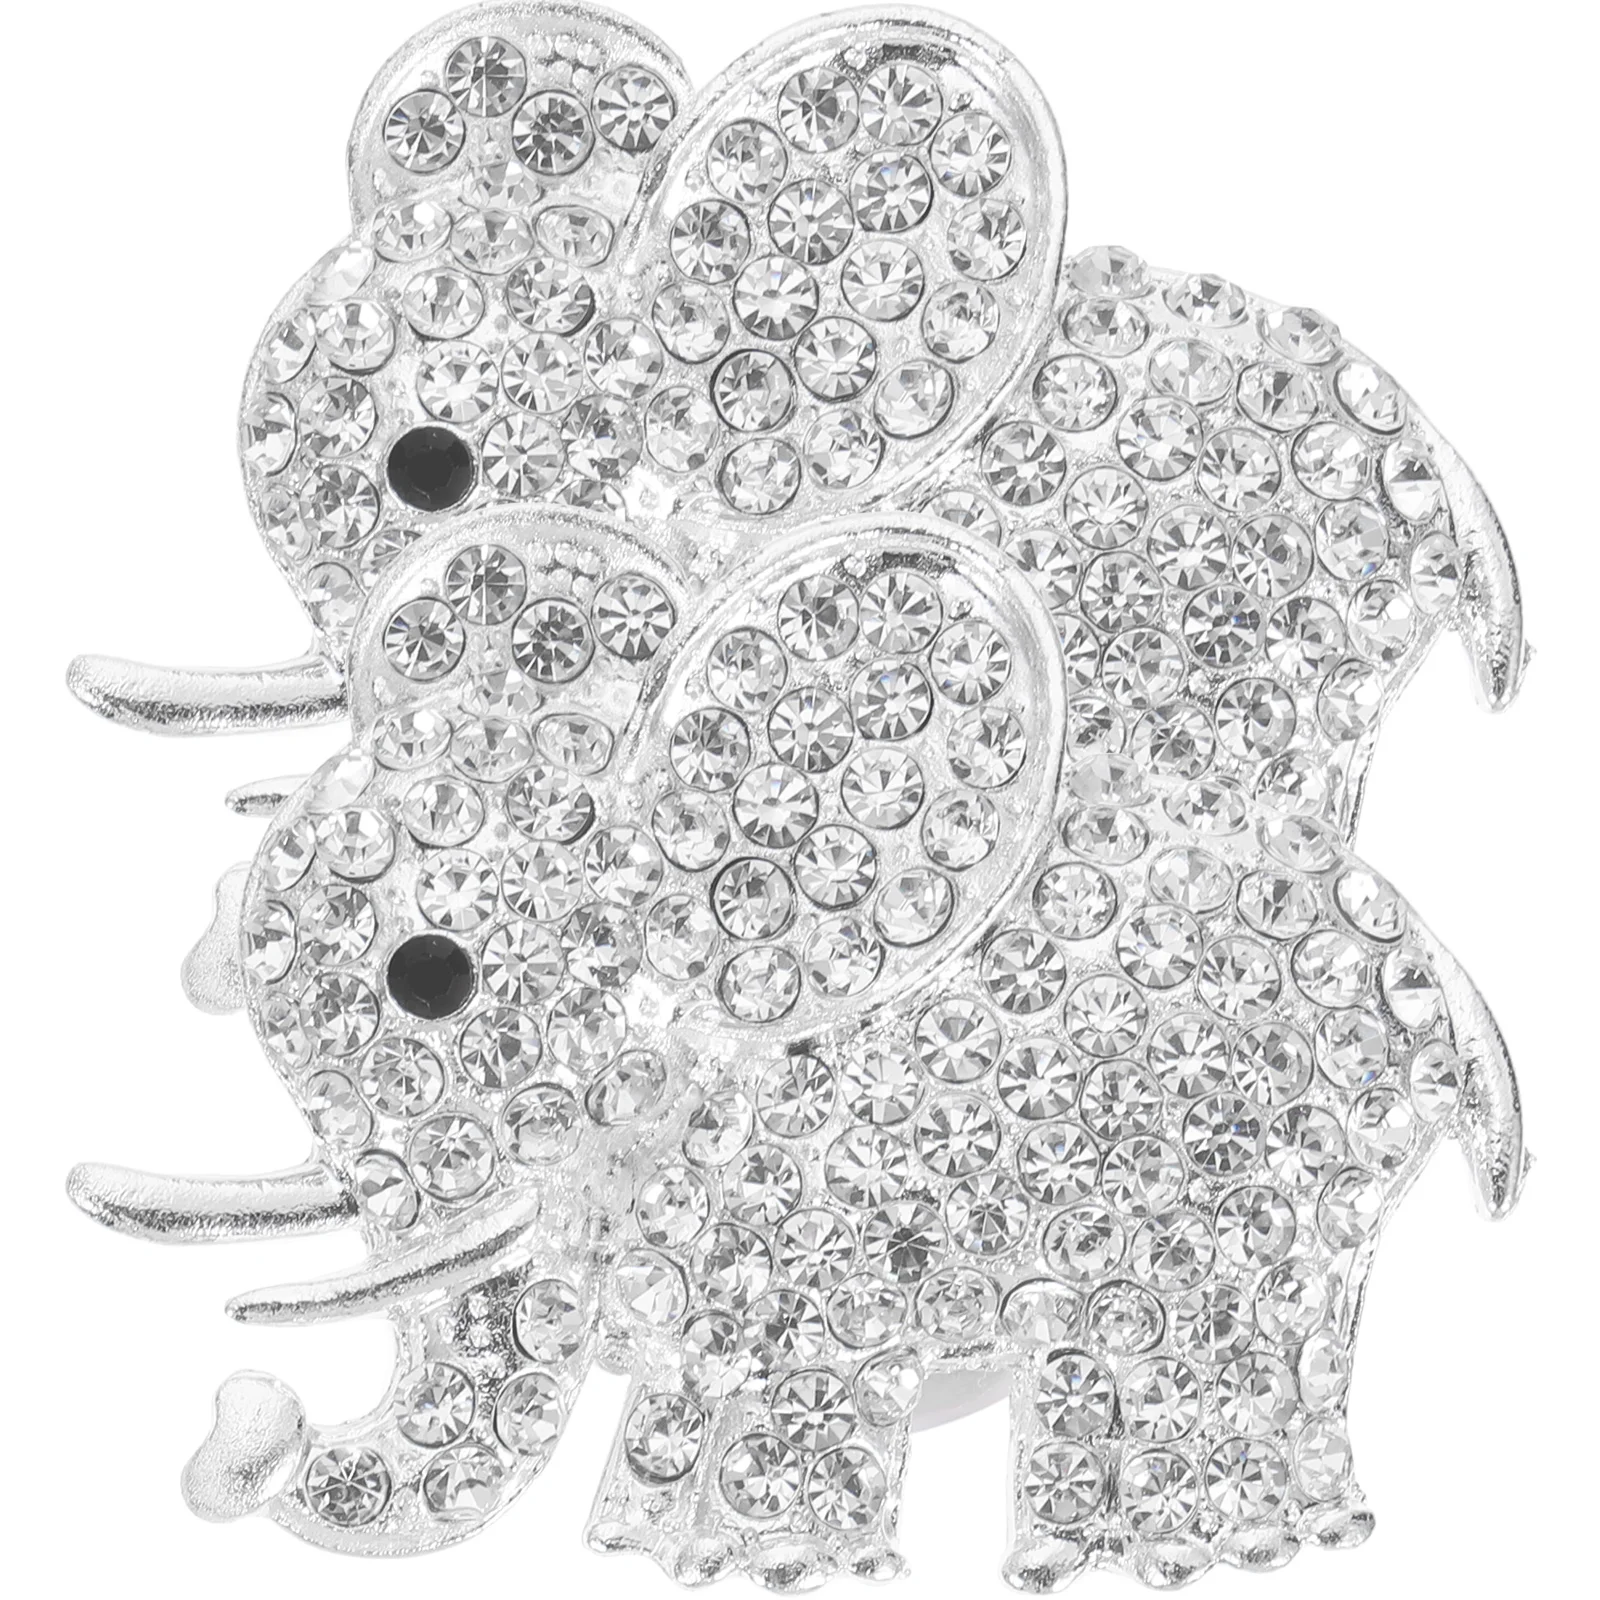 

2 Pcs Elephant Perfume Clip Car Accessories Women Aesthetic Girl Air Freshener Fresheners Vent Clips Crystal Outlet